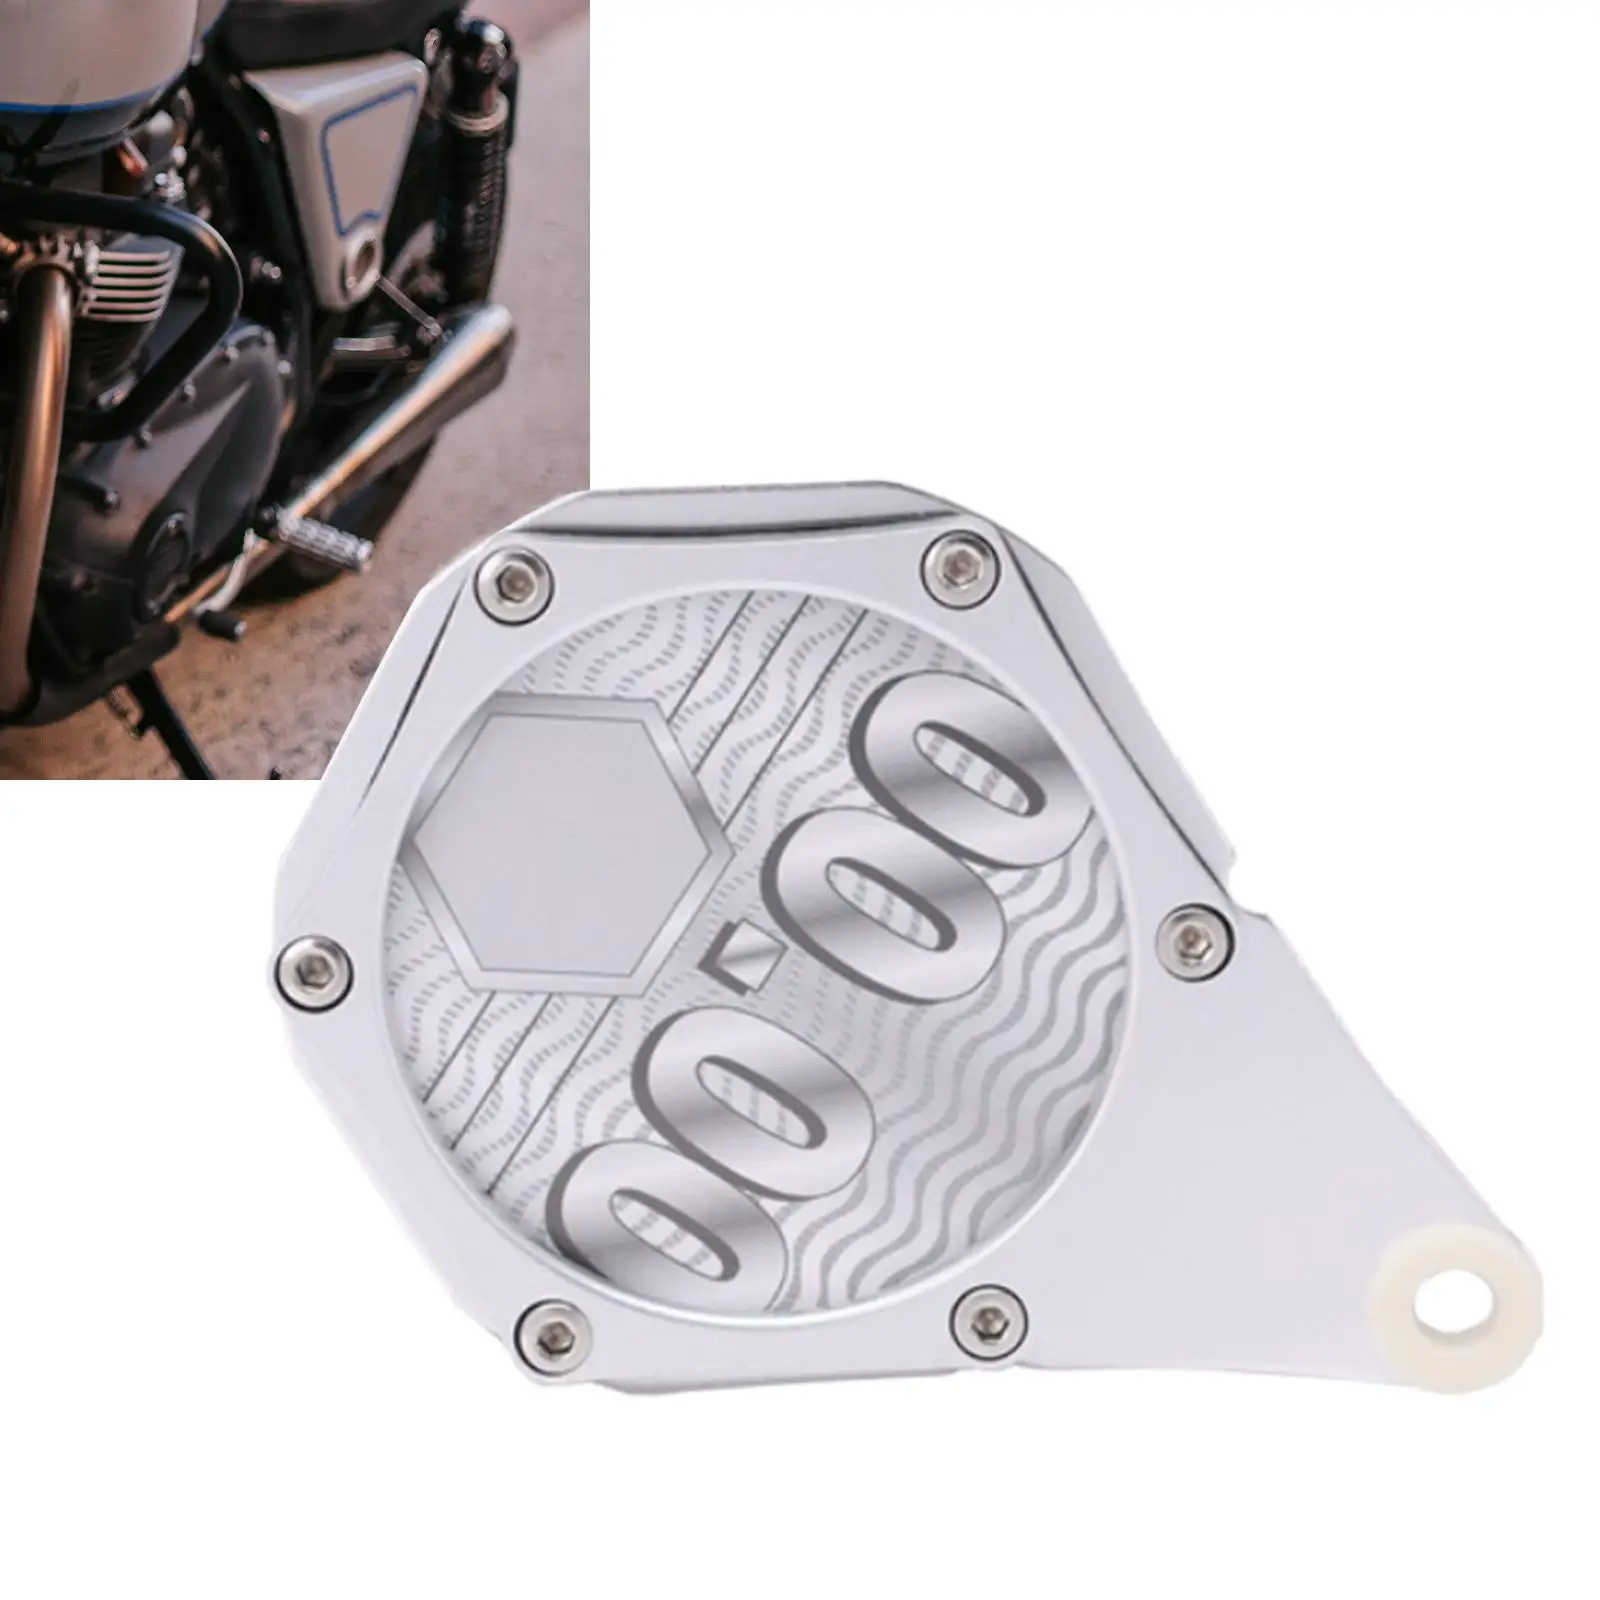 Hexagon Tax Disc Plate Motorbike Tax Disc Holder for Scooter Motor